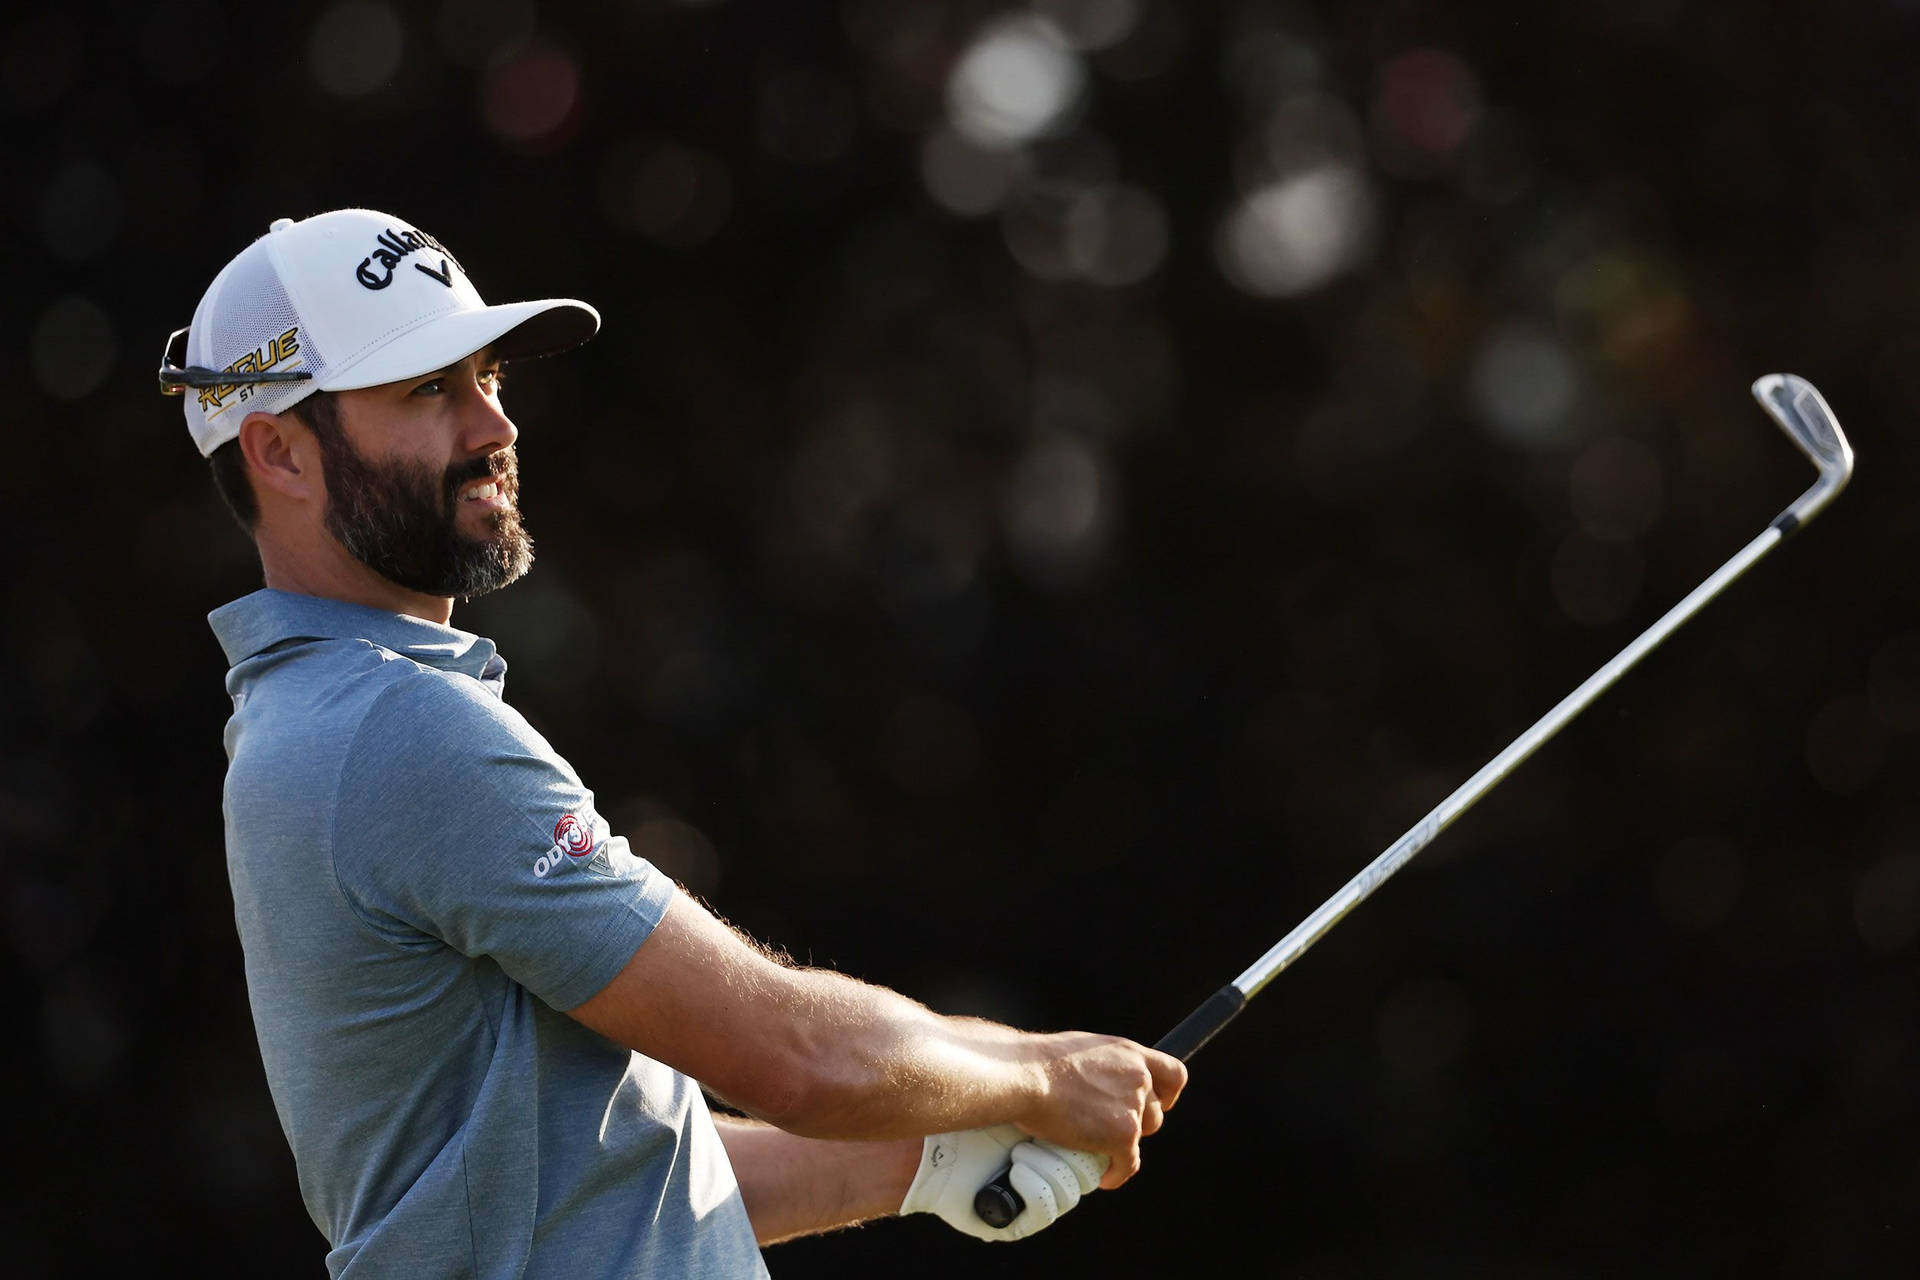 Renowned Golfer, Adam Hadwin Is Swinging For A Championship Wallpaper